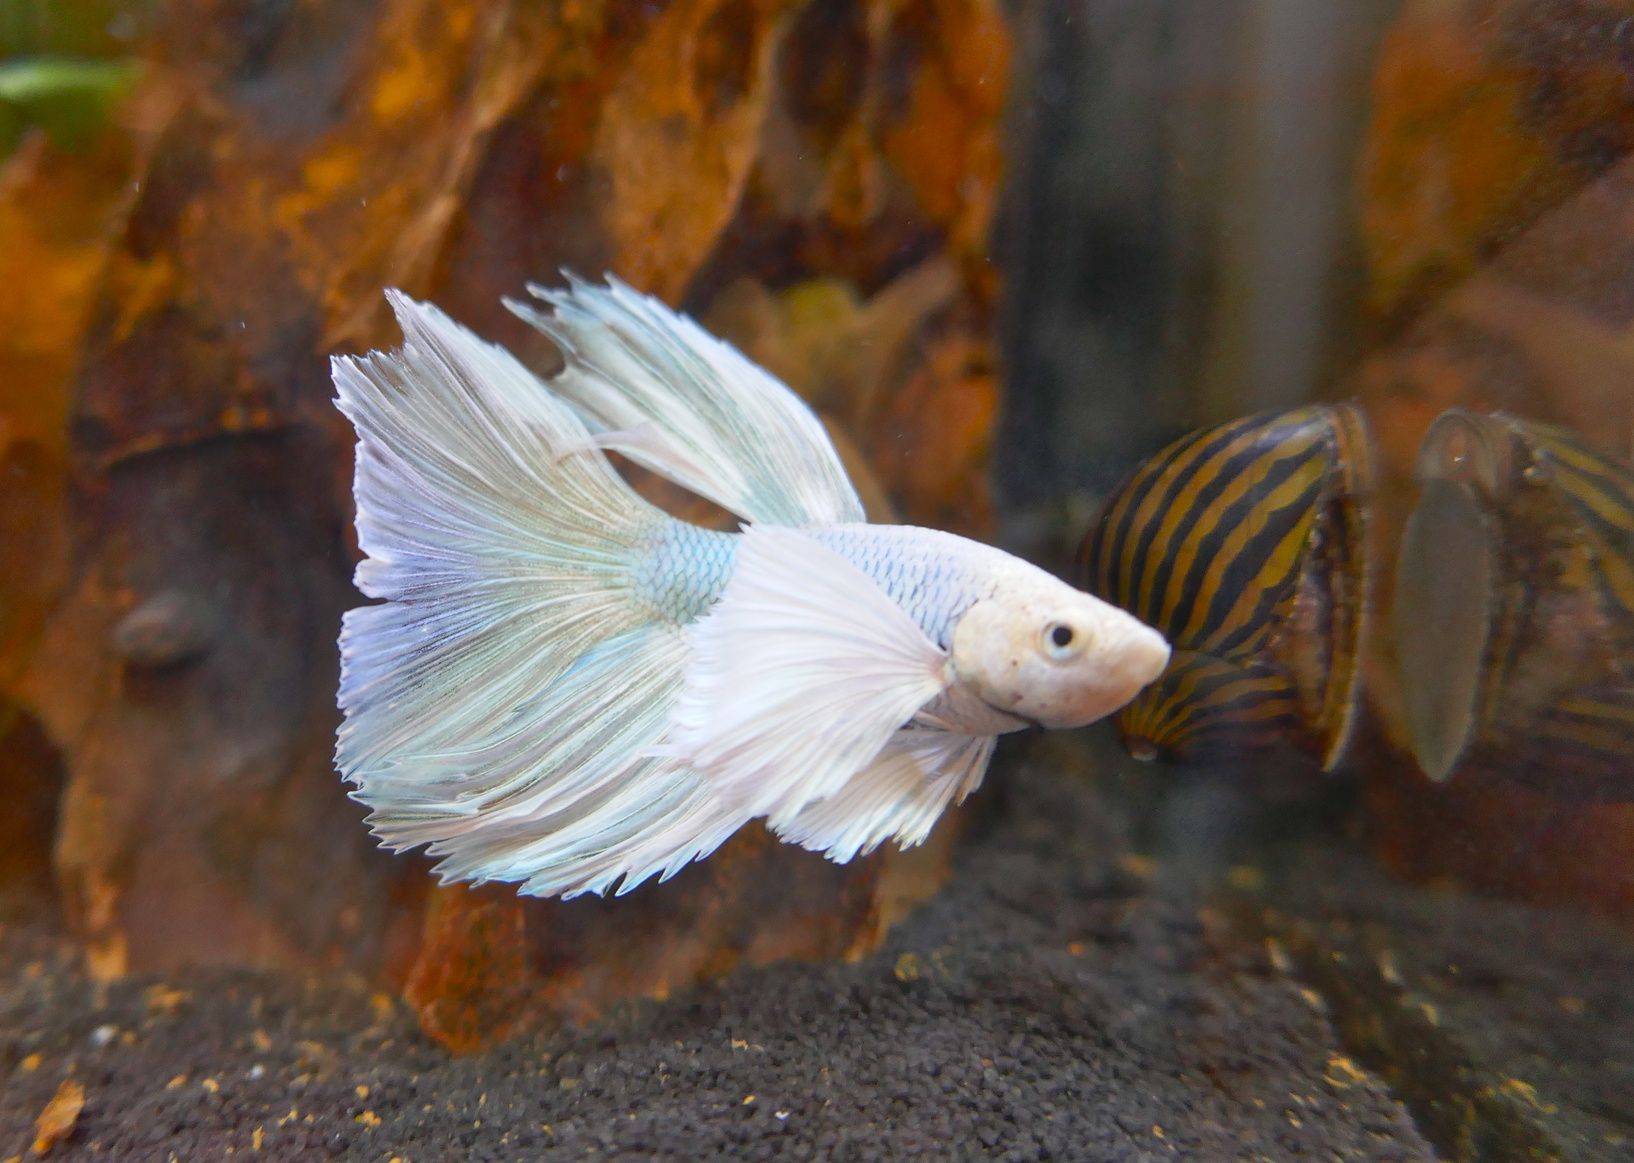 Pesce combattente CrownTail